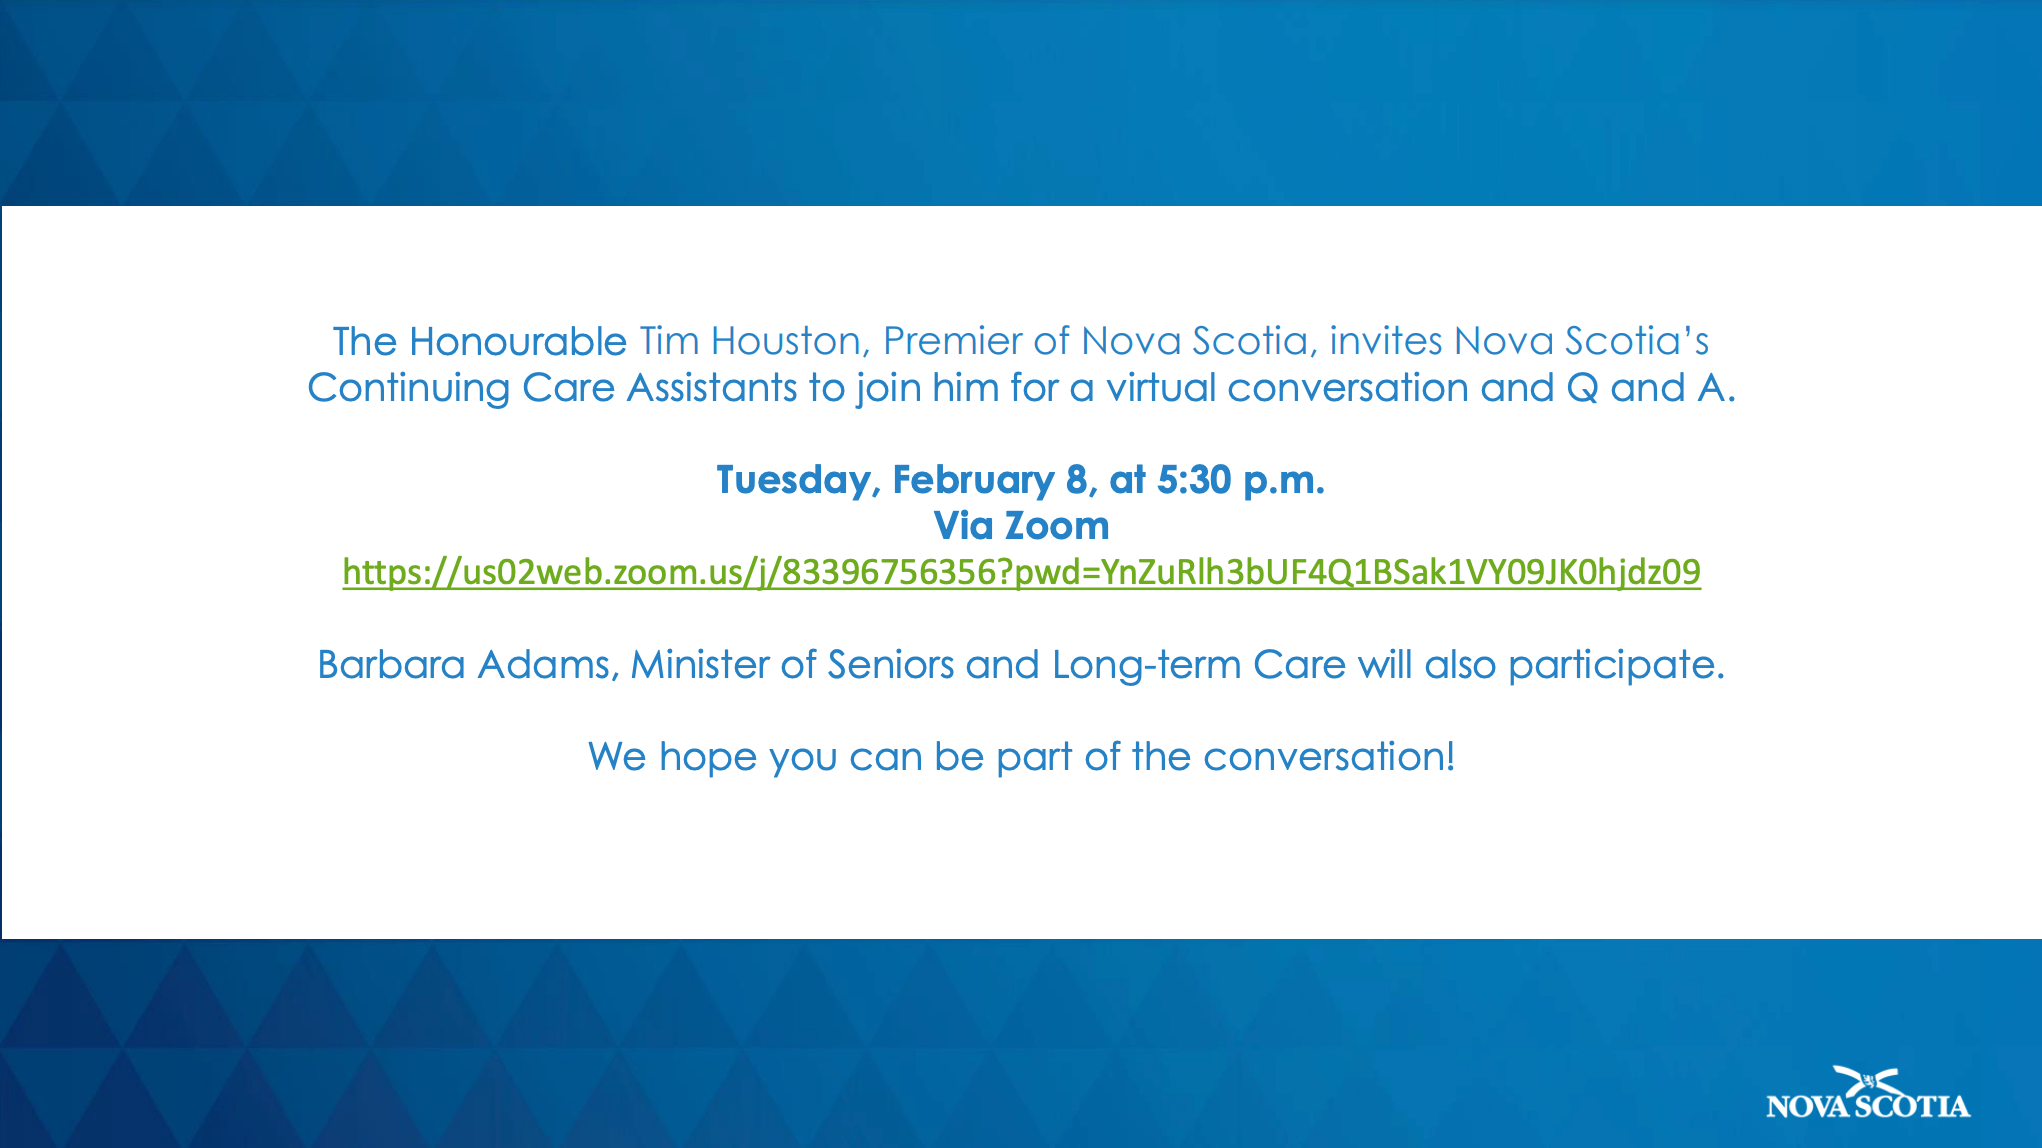 Invitation for CCAs to zoom call with Premier Tim Houston on Feb. 8